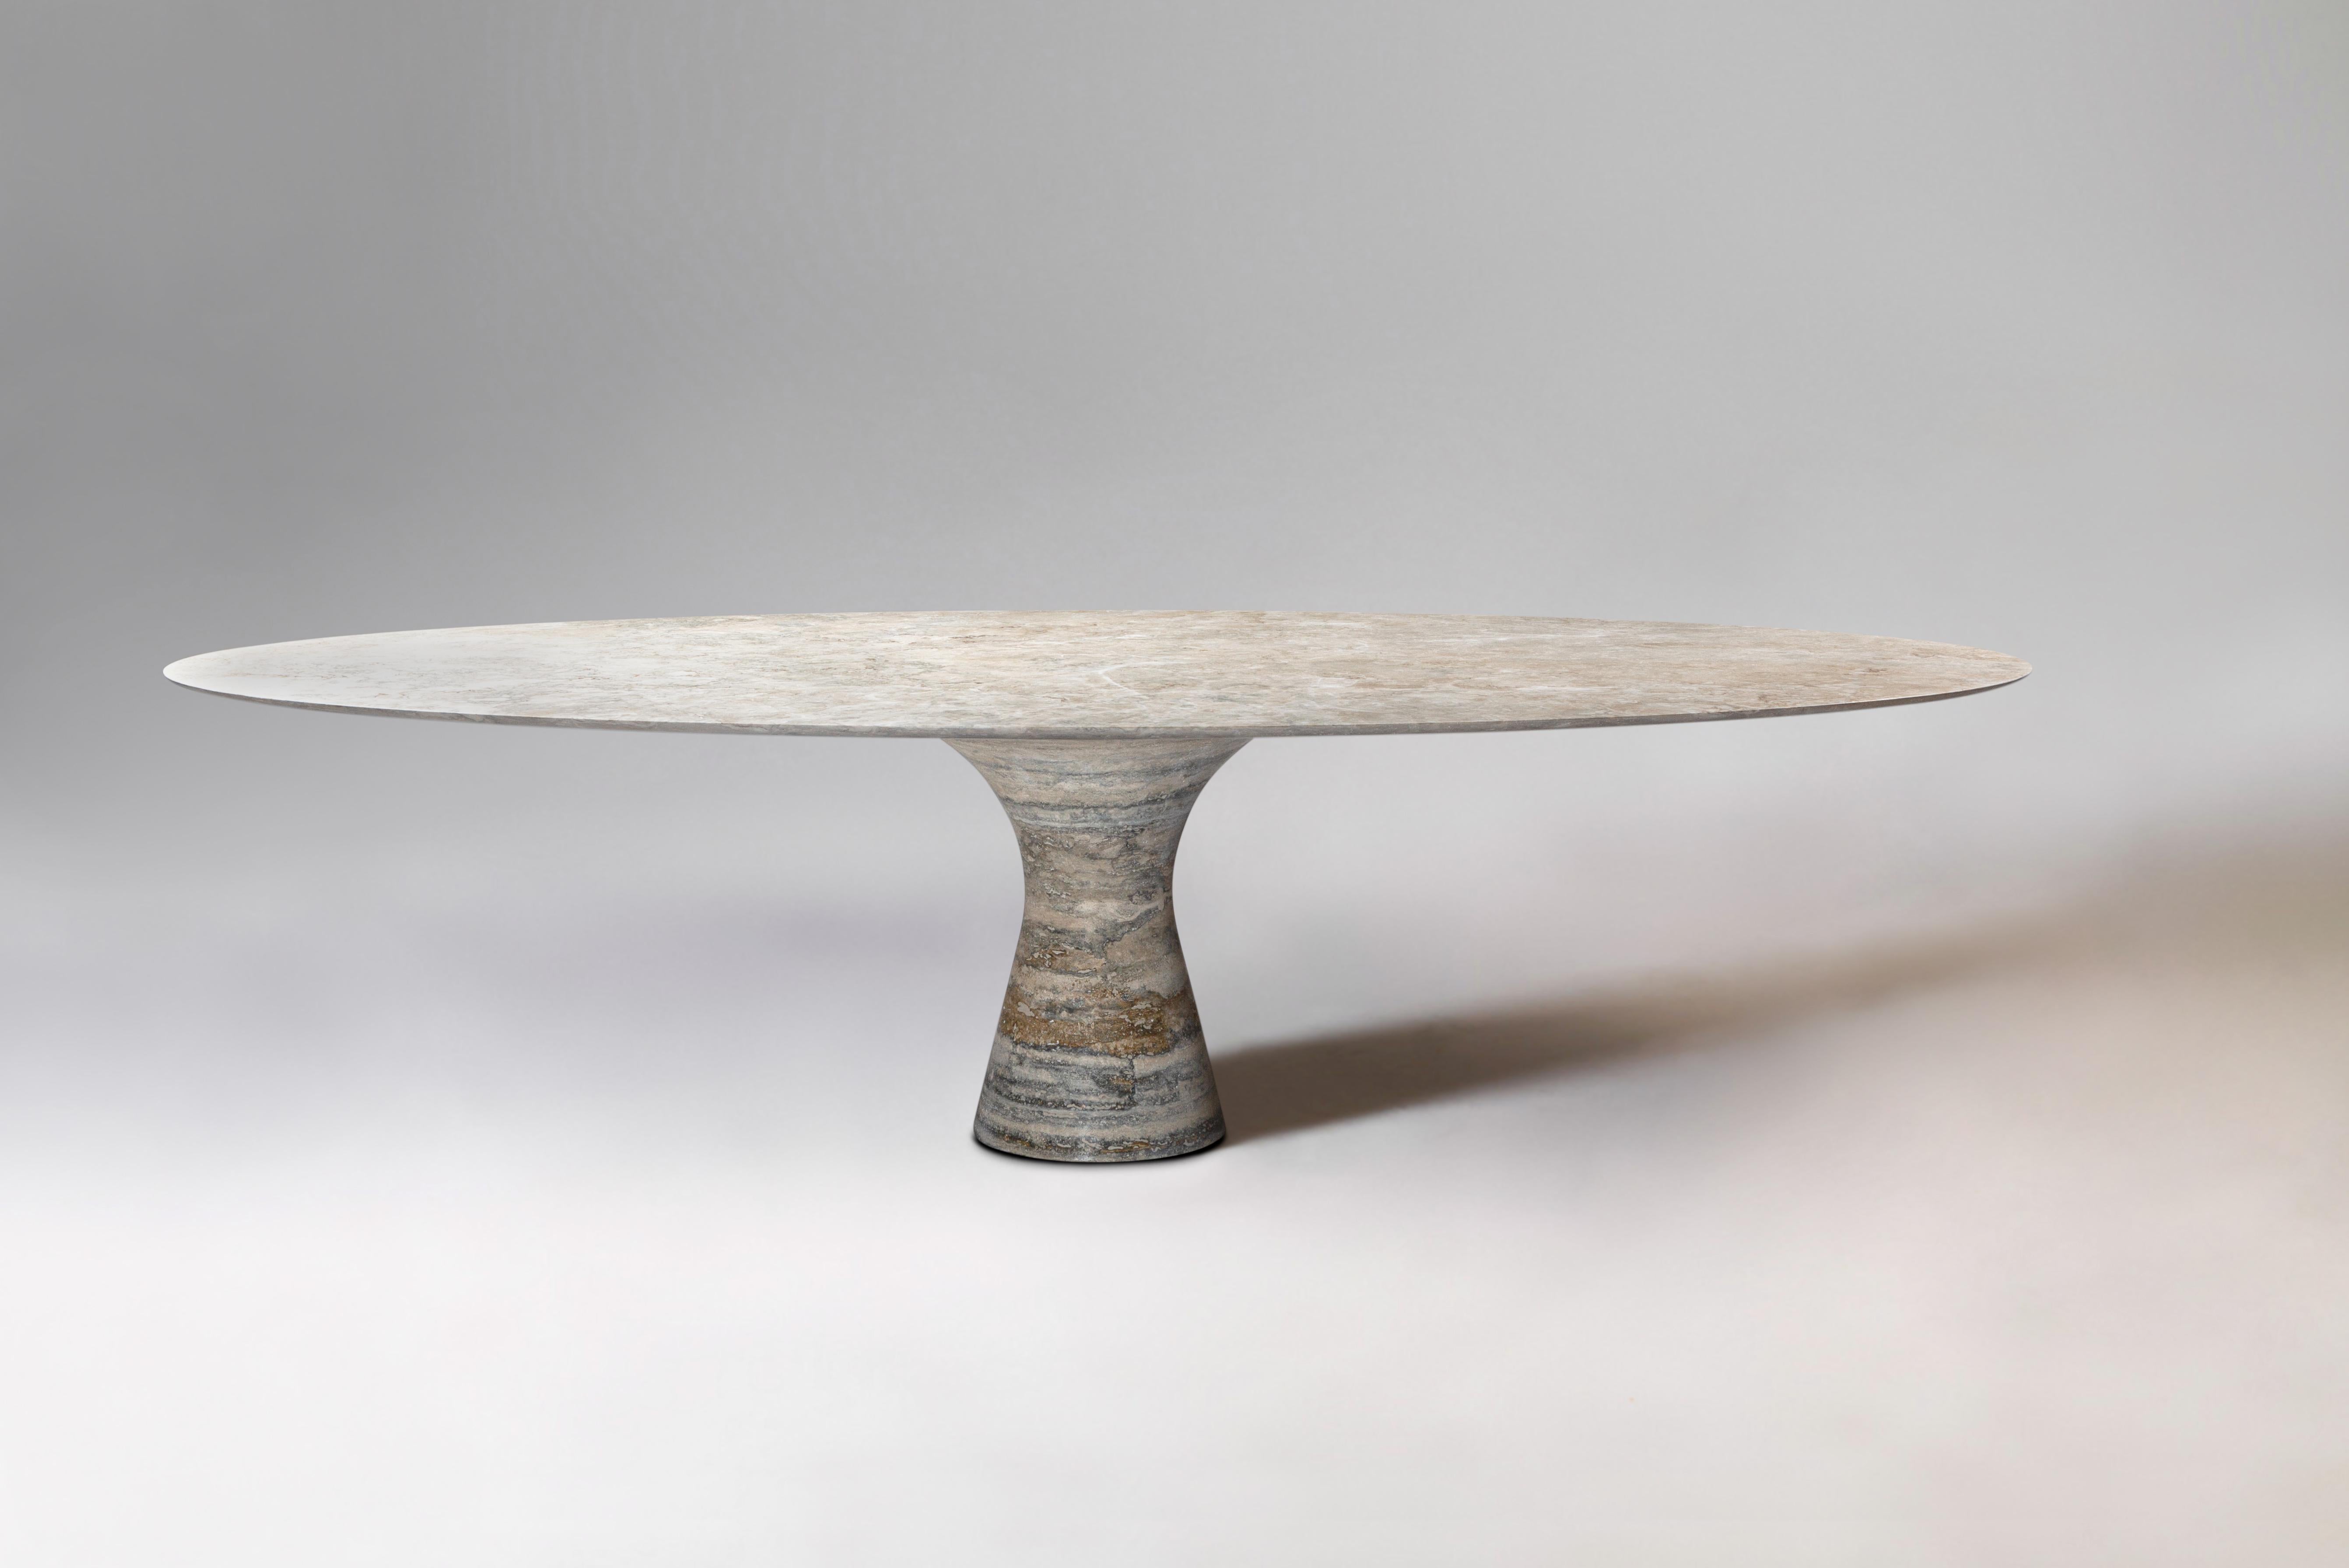 Grey Saint Laurent Refined Contemporary Marble Oval Table 210/75 For Sale 1